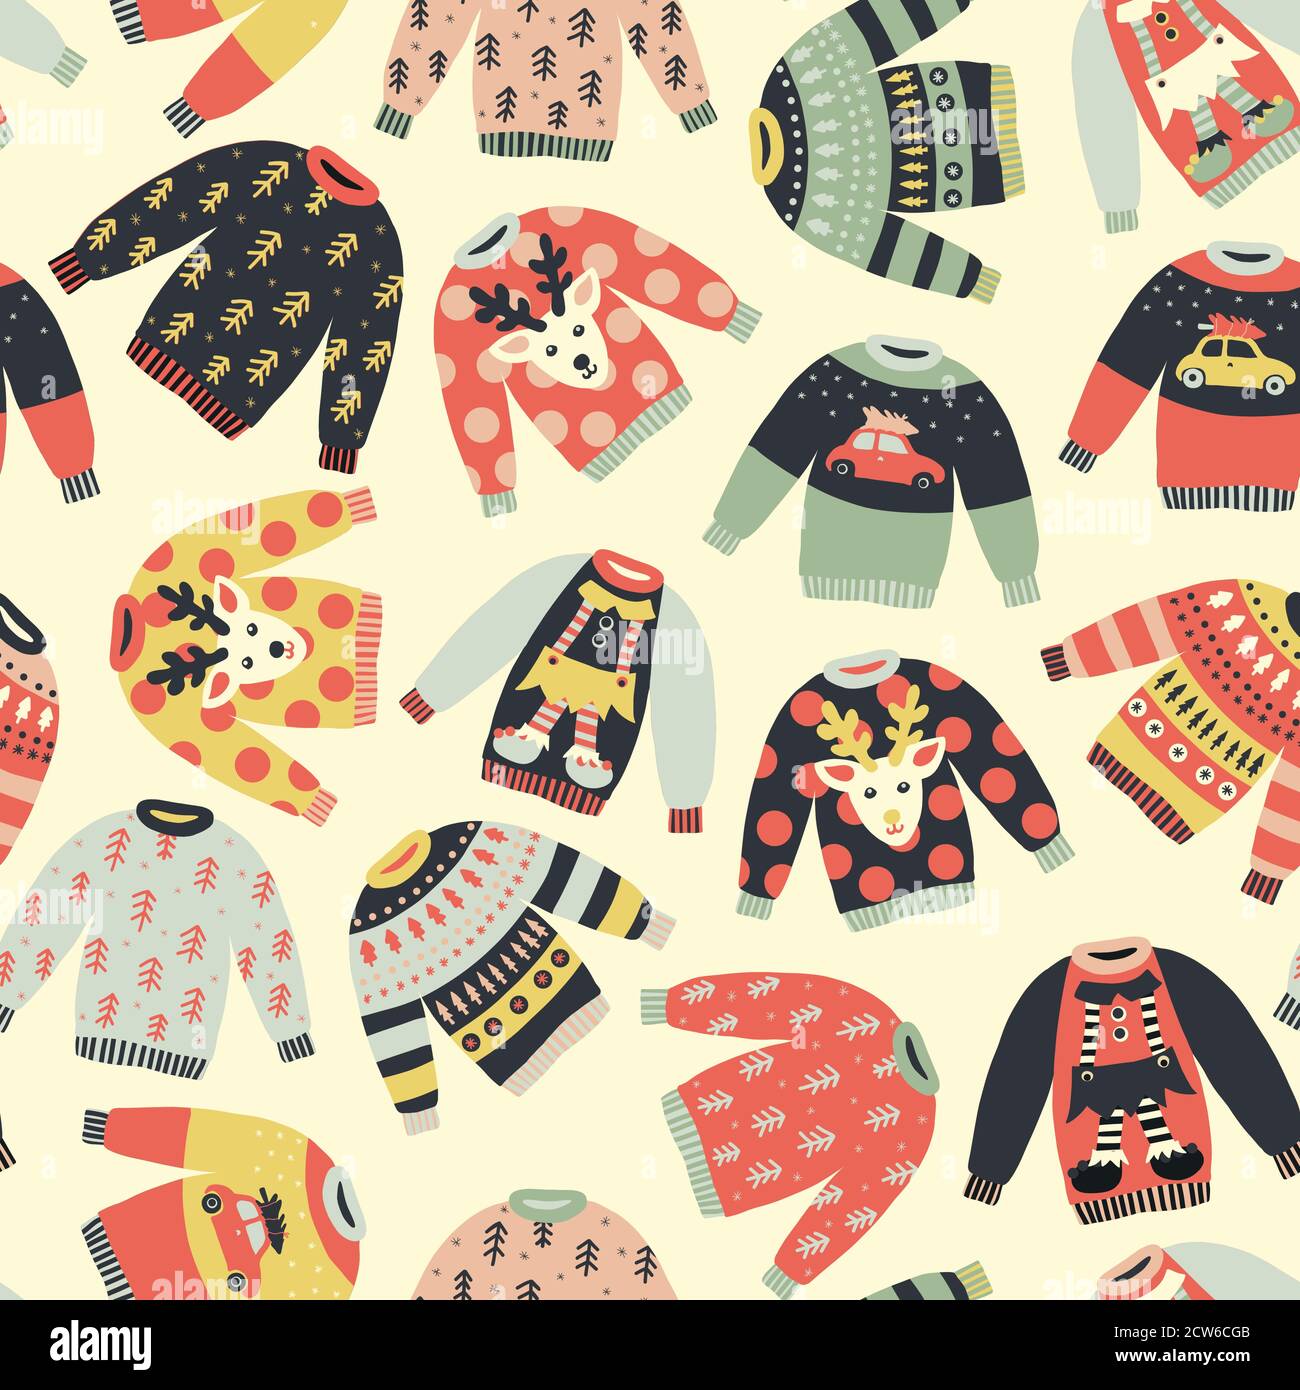 Seamless pattern Ugly Christmas sweaters. Repeating vector holiday vintage background. Knitted winter jumpers with Norwegian ornaments and decorations Stock Vector